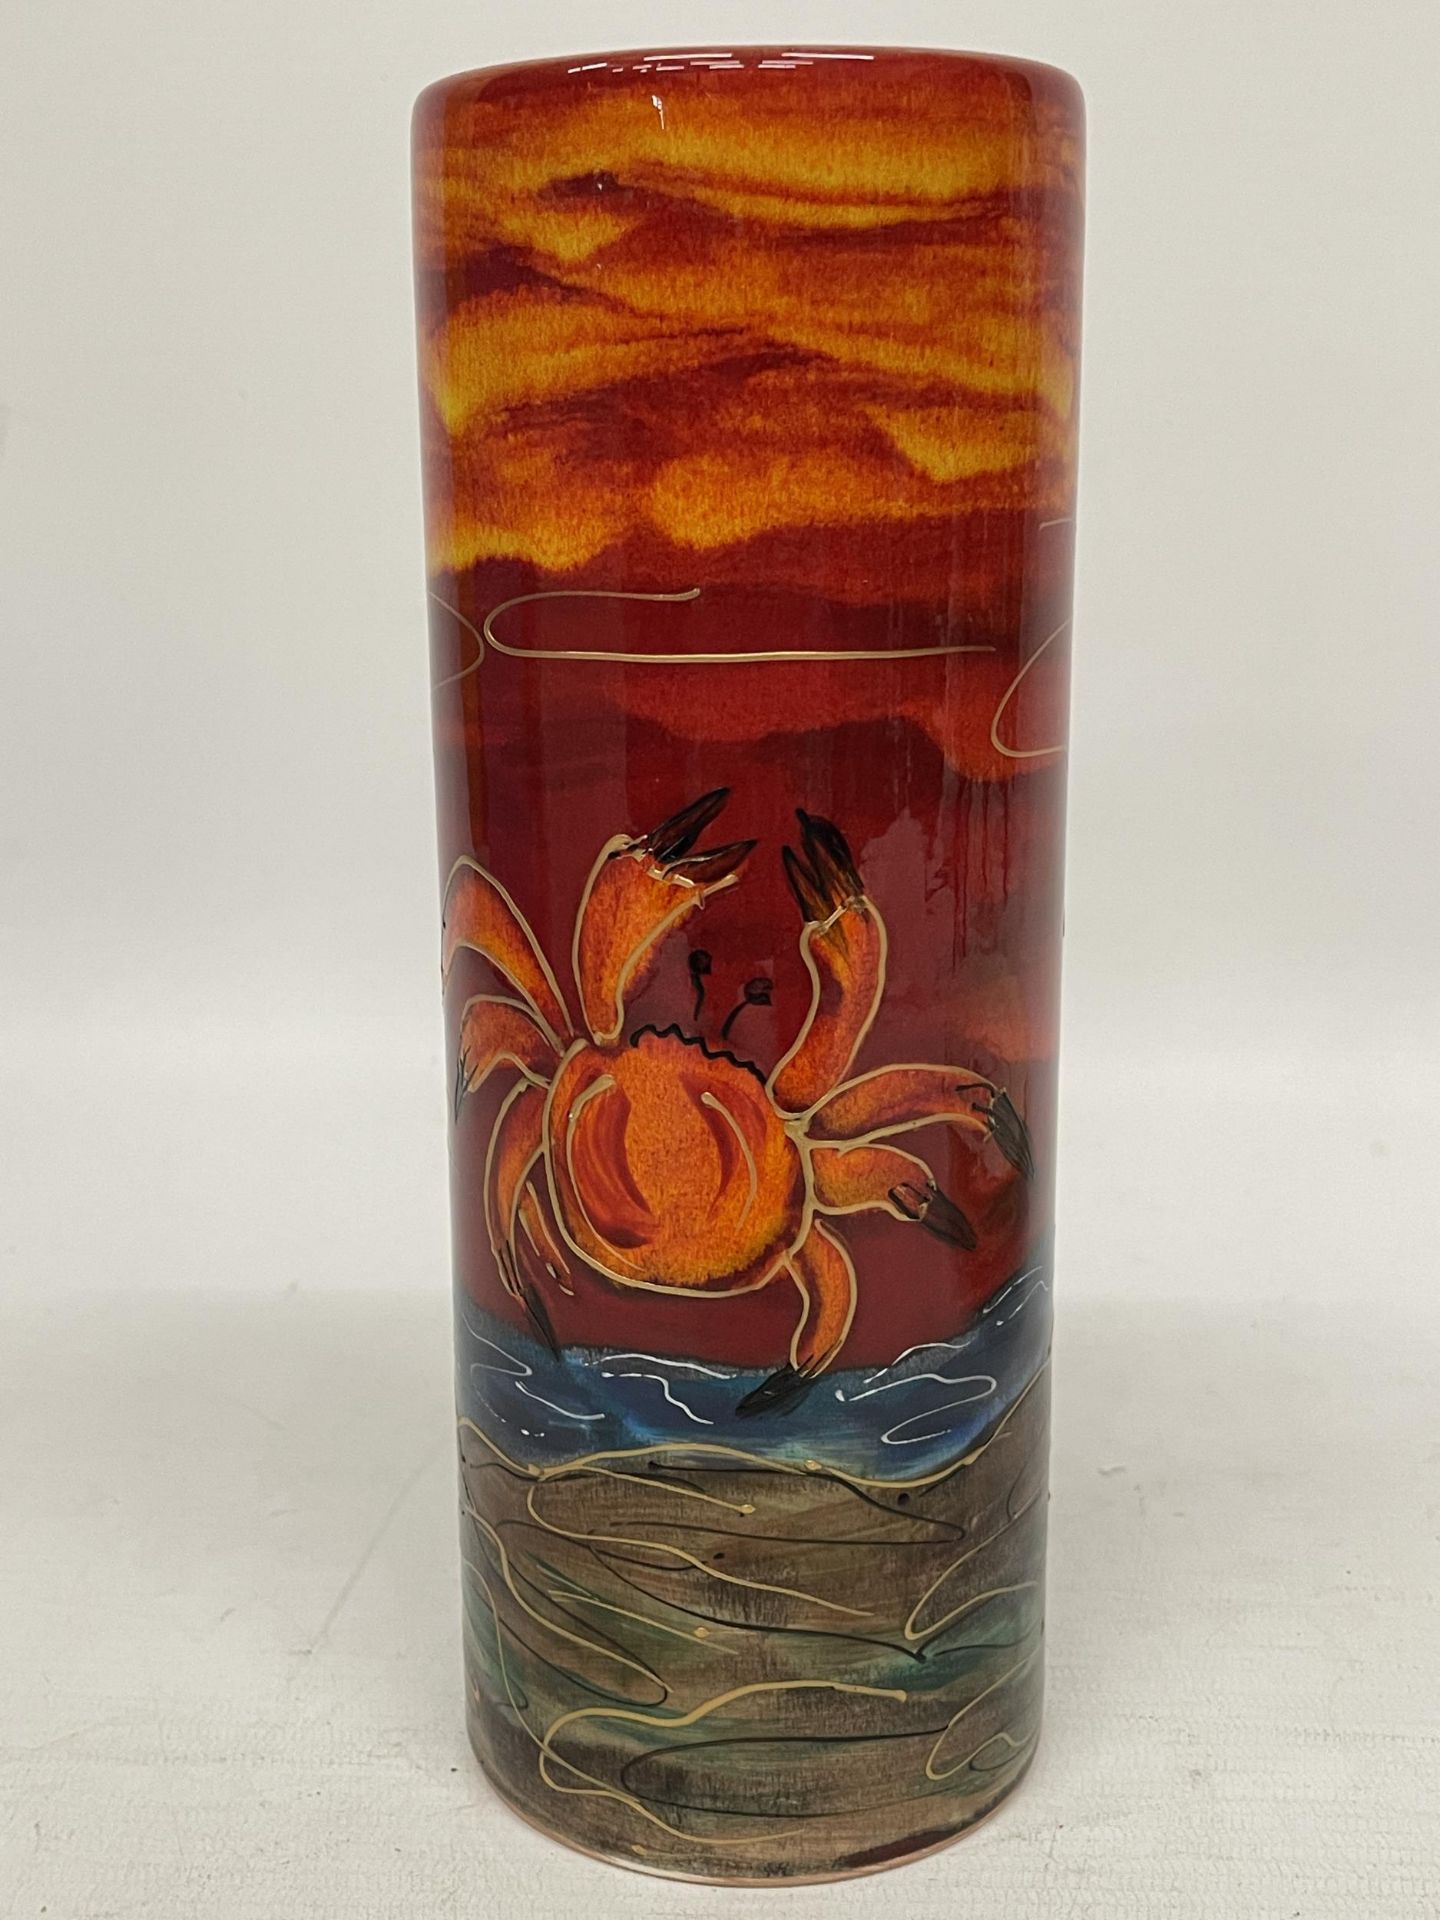 AN ANITA HARRIS HAND PAINTED AND SIGNED IN GOLD CRAB VASE